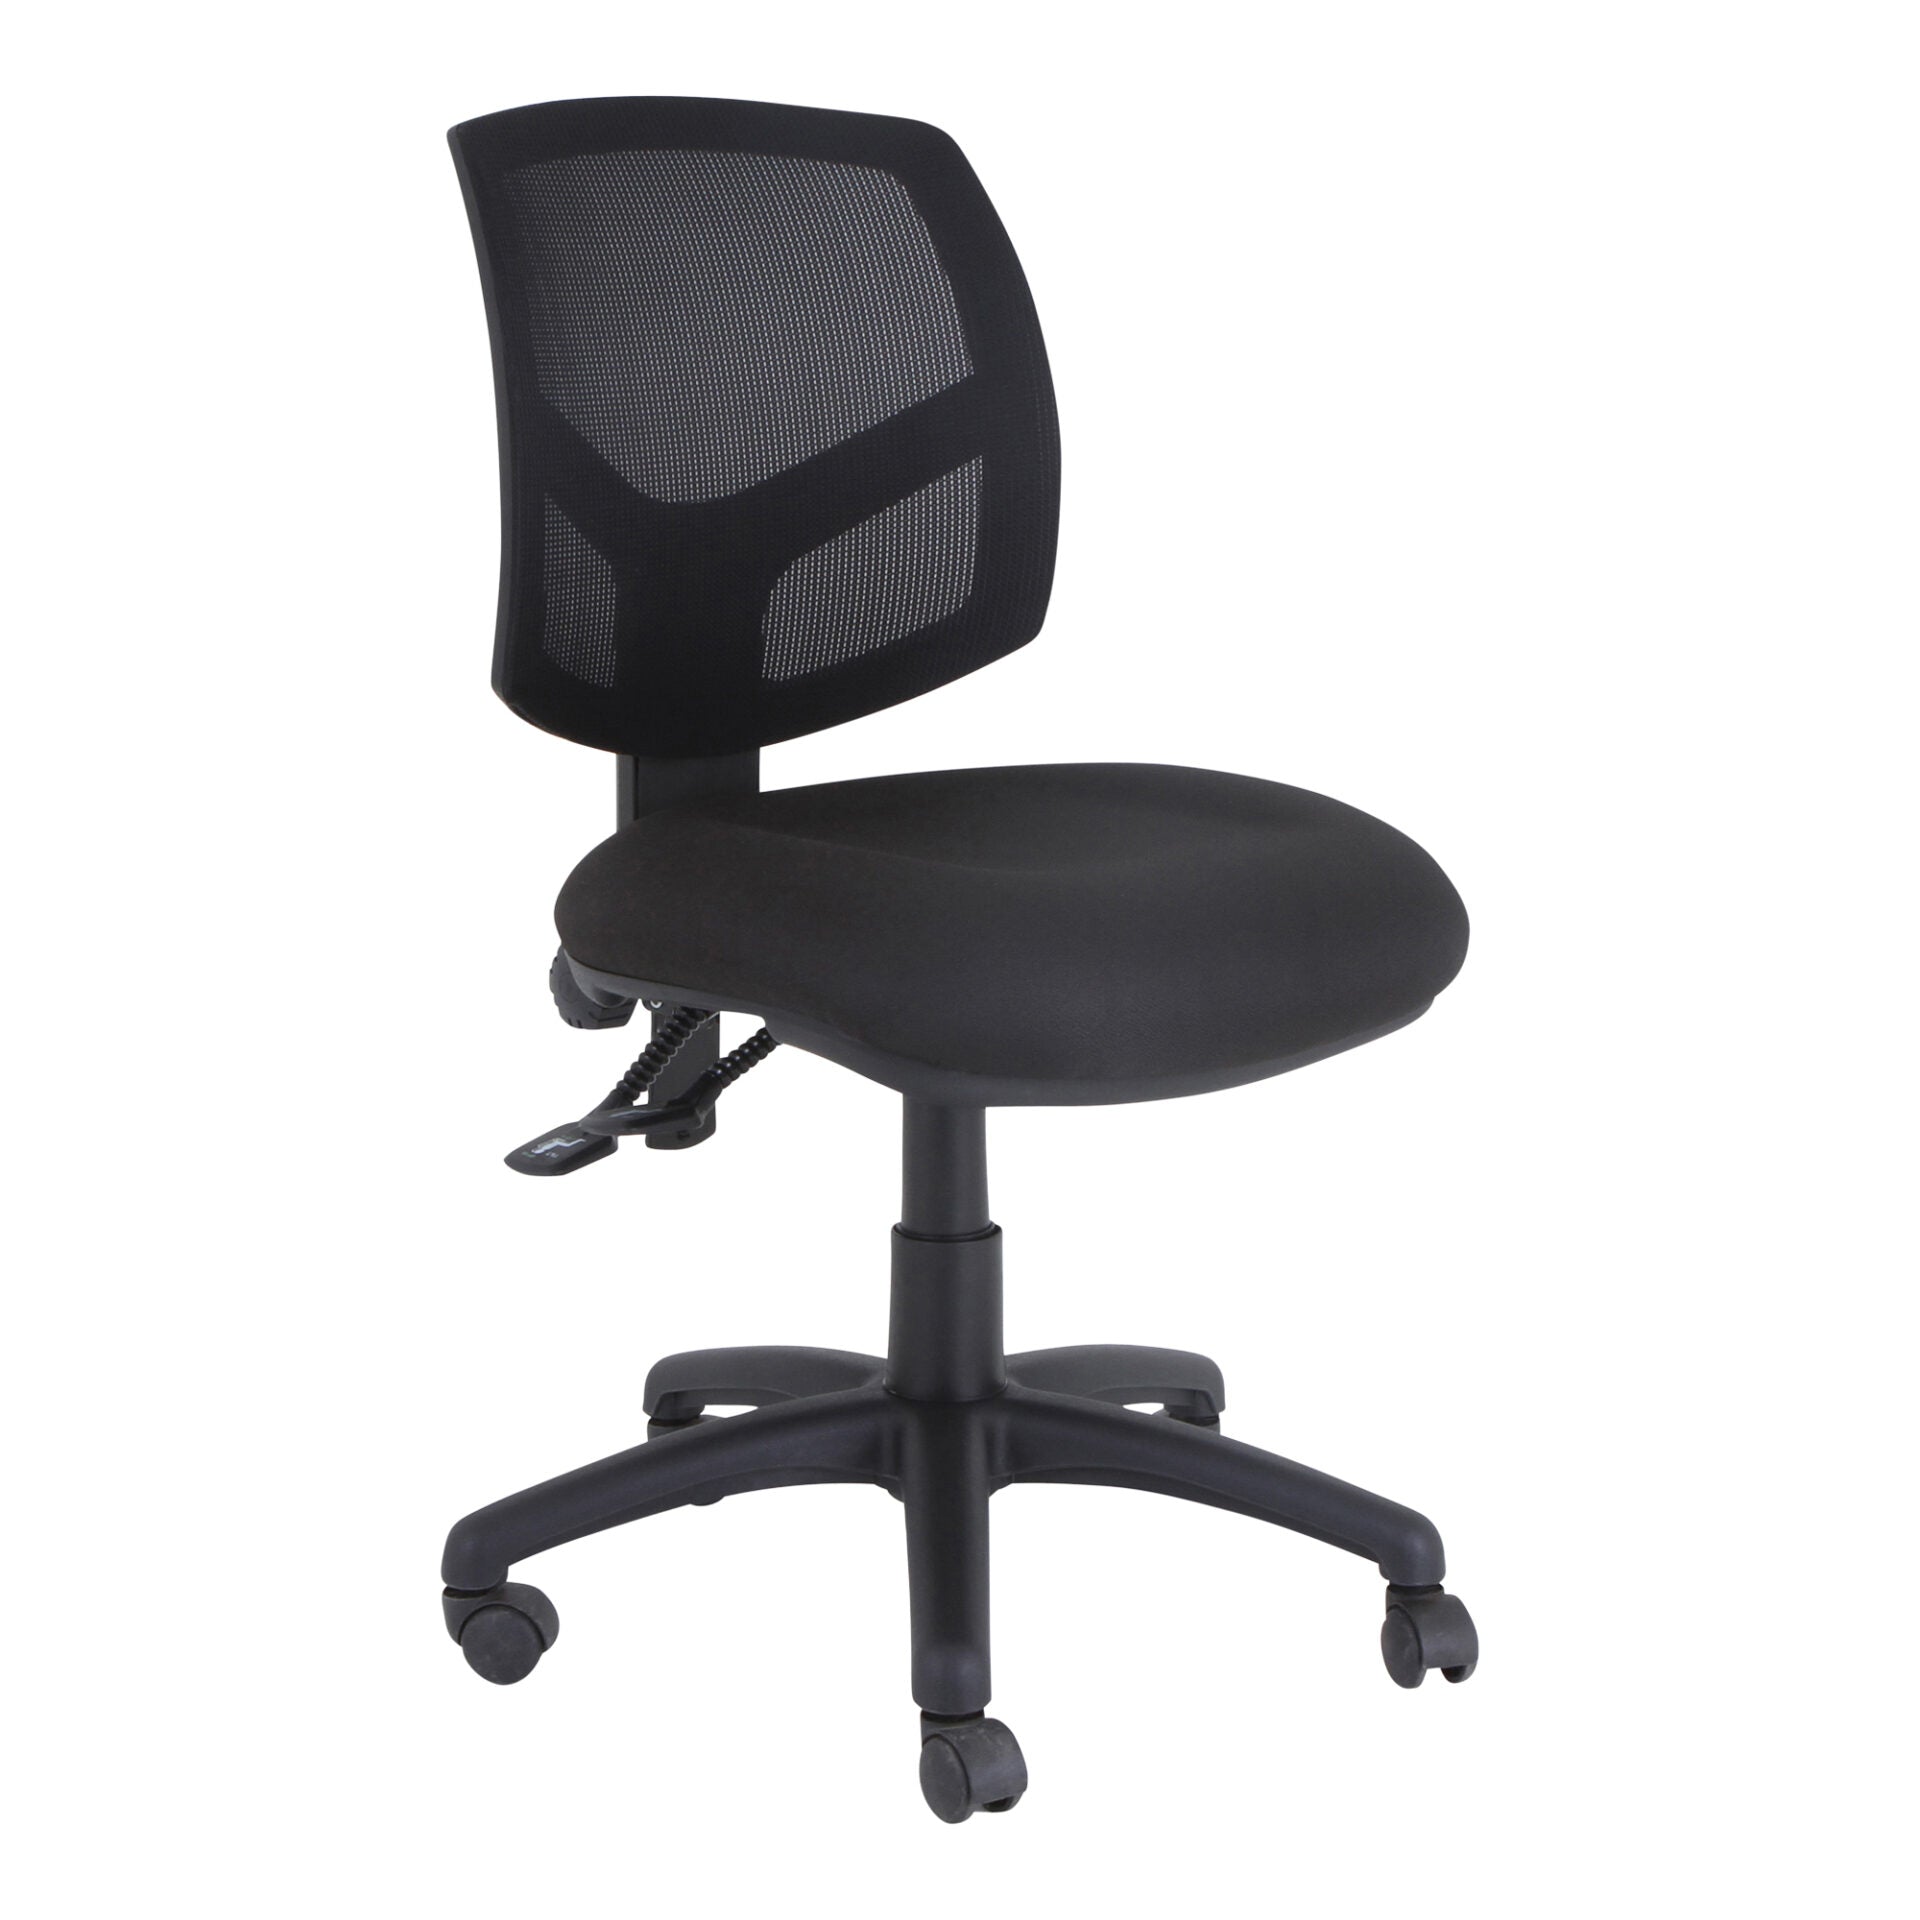 Mondo Java mesh-back office chair in black, front view.